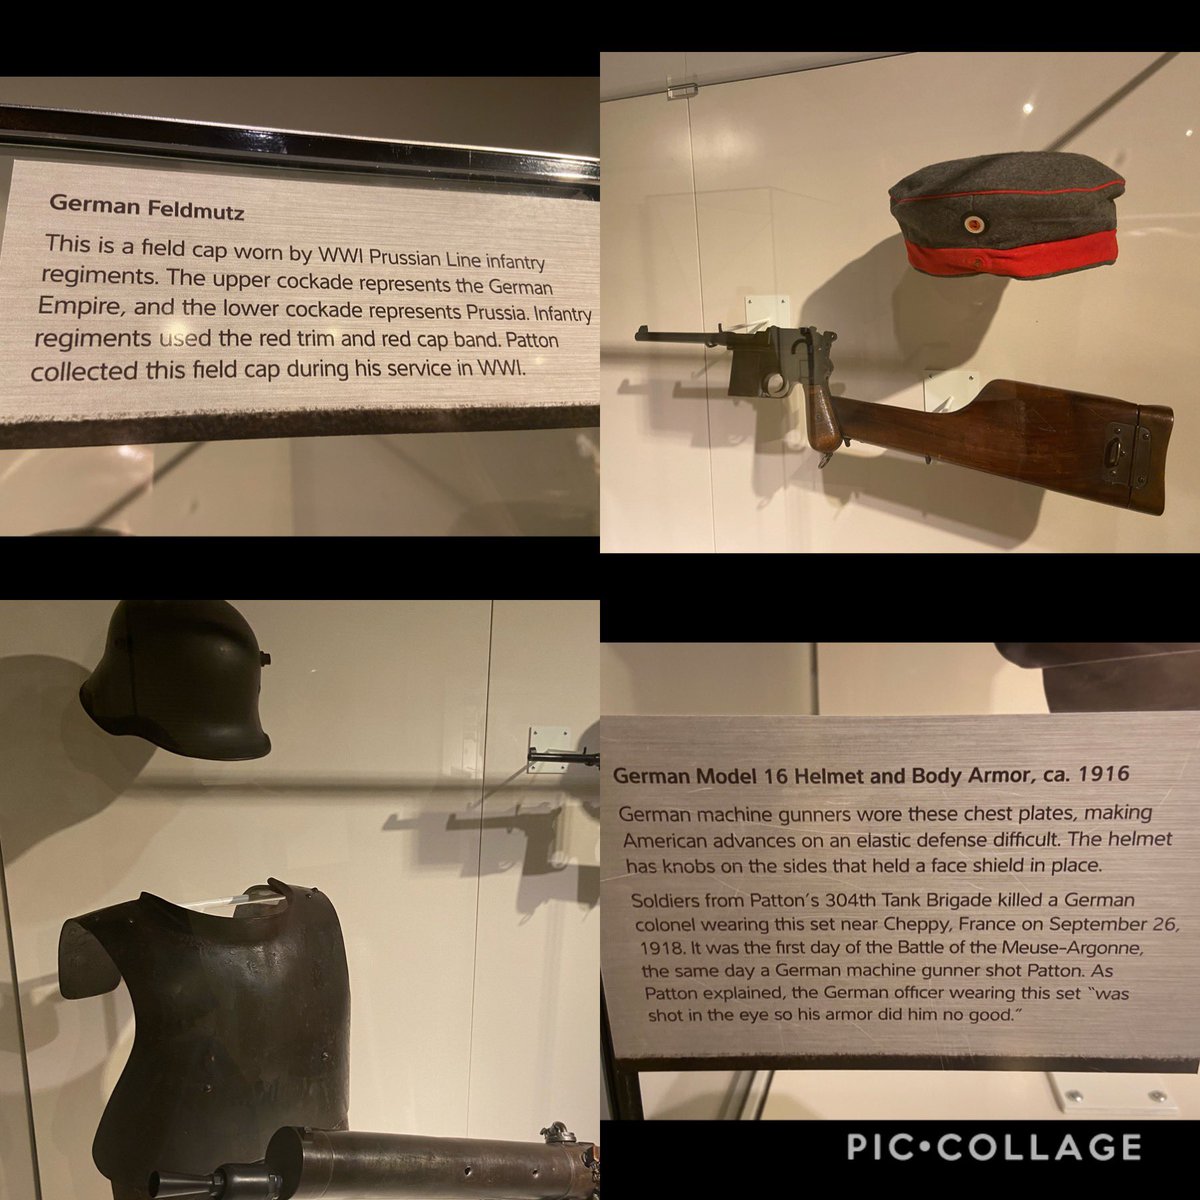 Patton also took items from the enemies that he fought in his wars. The Italian standard pole really caught my eye. Mussolini tried so hard to emulate the ancient Roman Empire—and obviously failed miserably. Patton collected it while in Sicily. Some interesting WWI items as well!